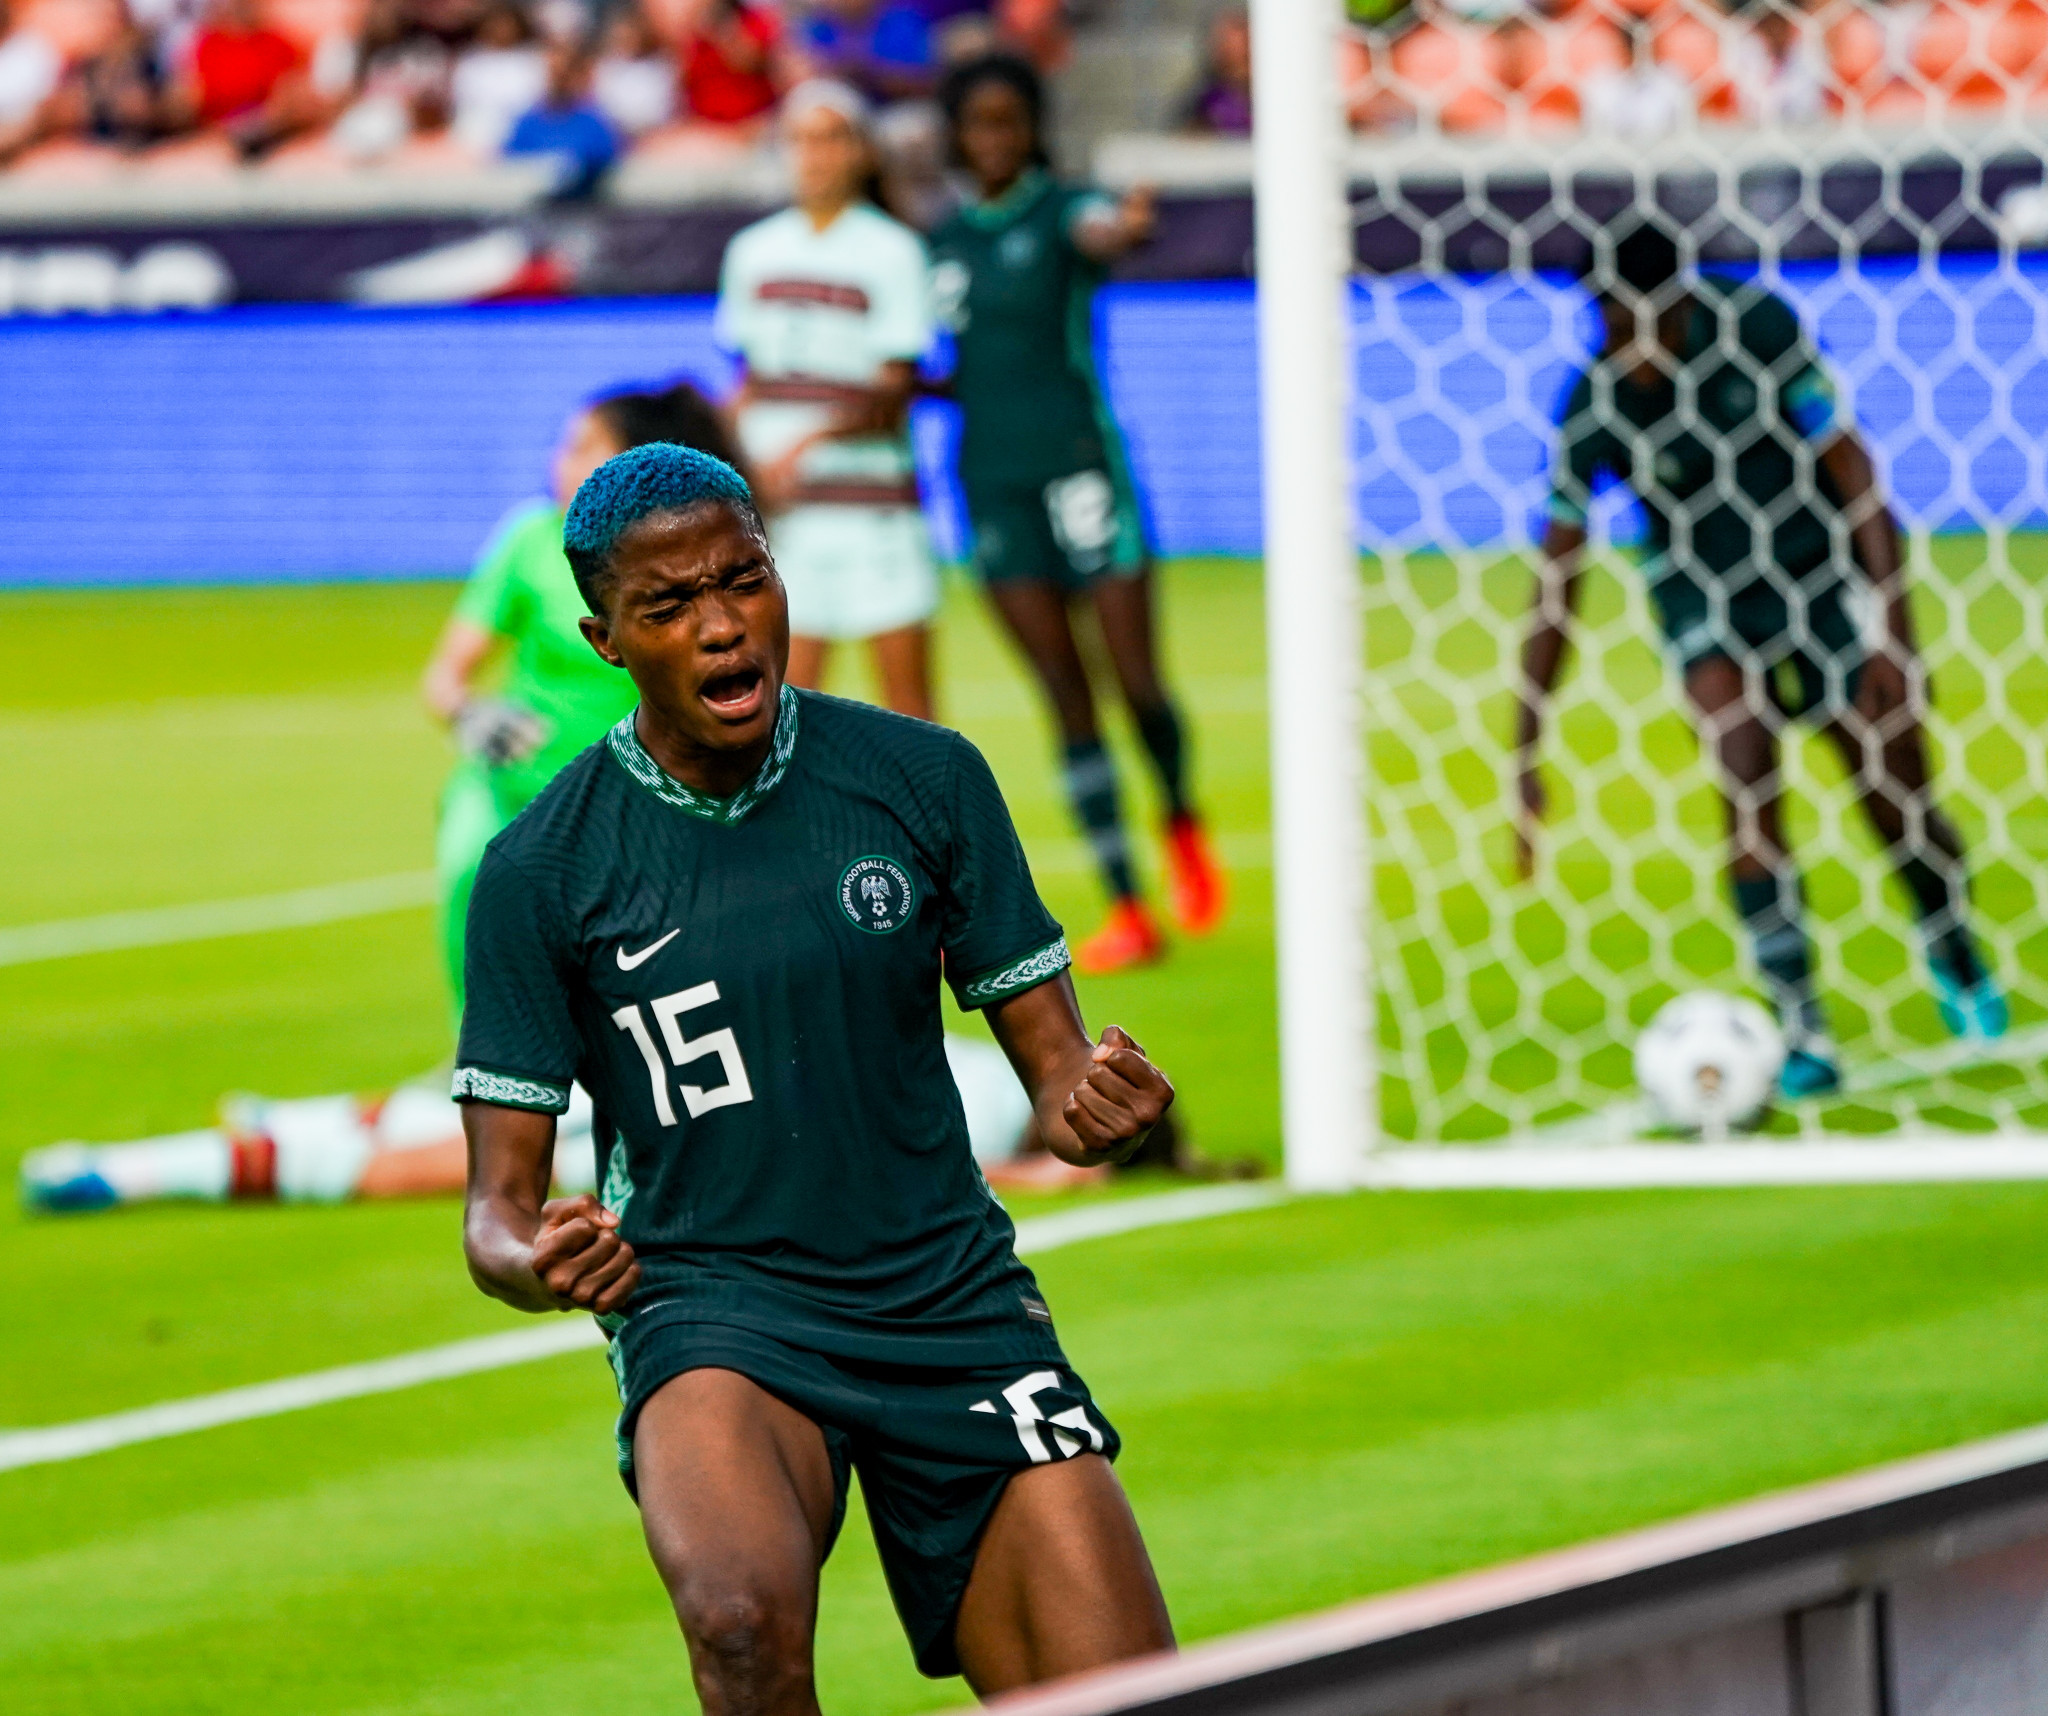 Rasheedat Ajibade scored the winner for Nigeria as they reached the semi-finals of the Women's Africa Cup of Nations in Morocco ©Getty Images